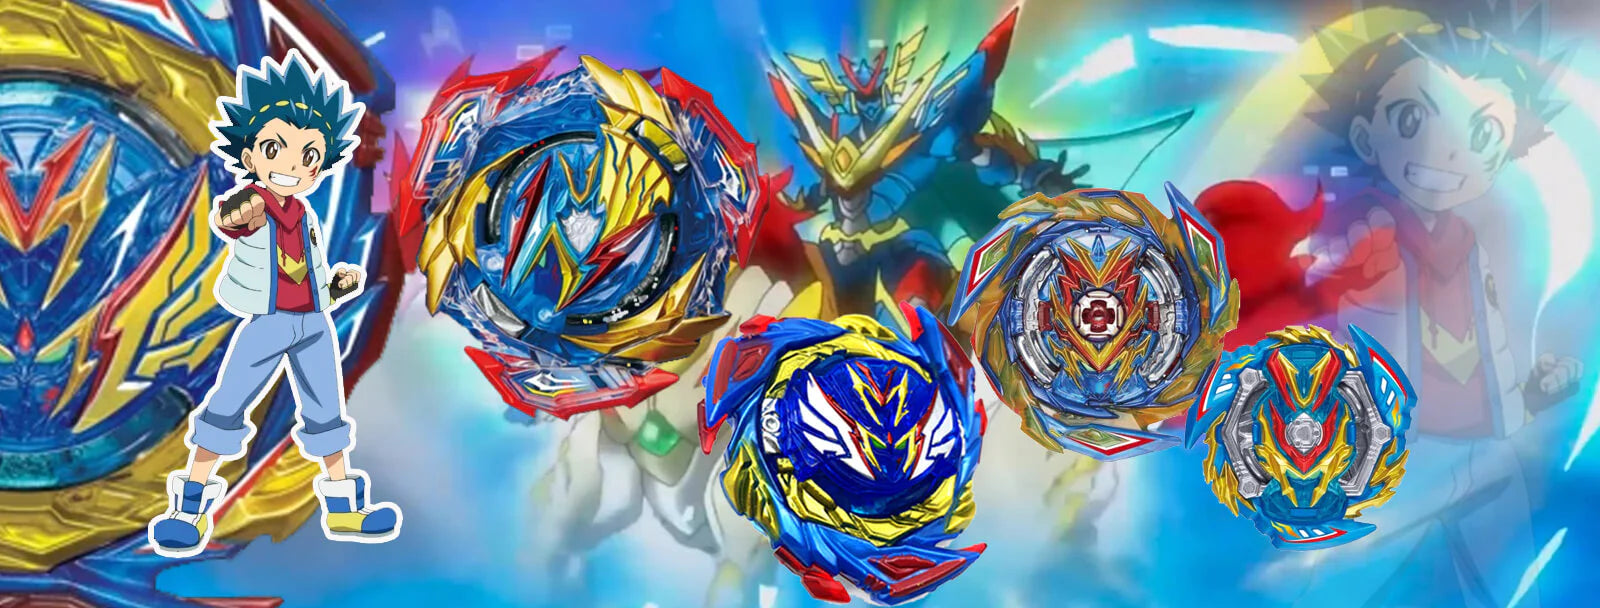 Beyblades: The Craze, History, and Enduring Sport of Spinning Tops